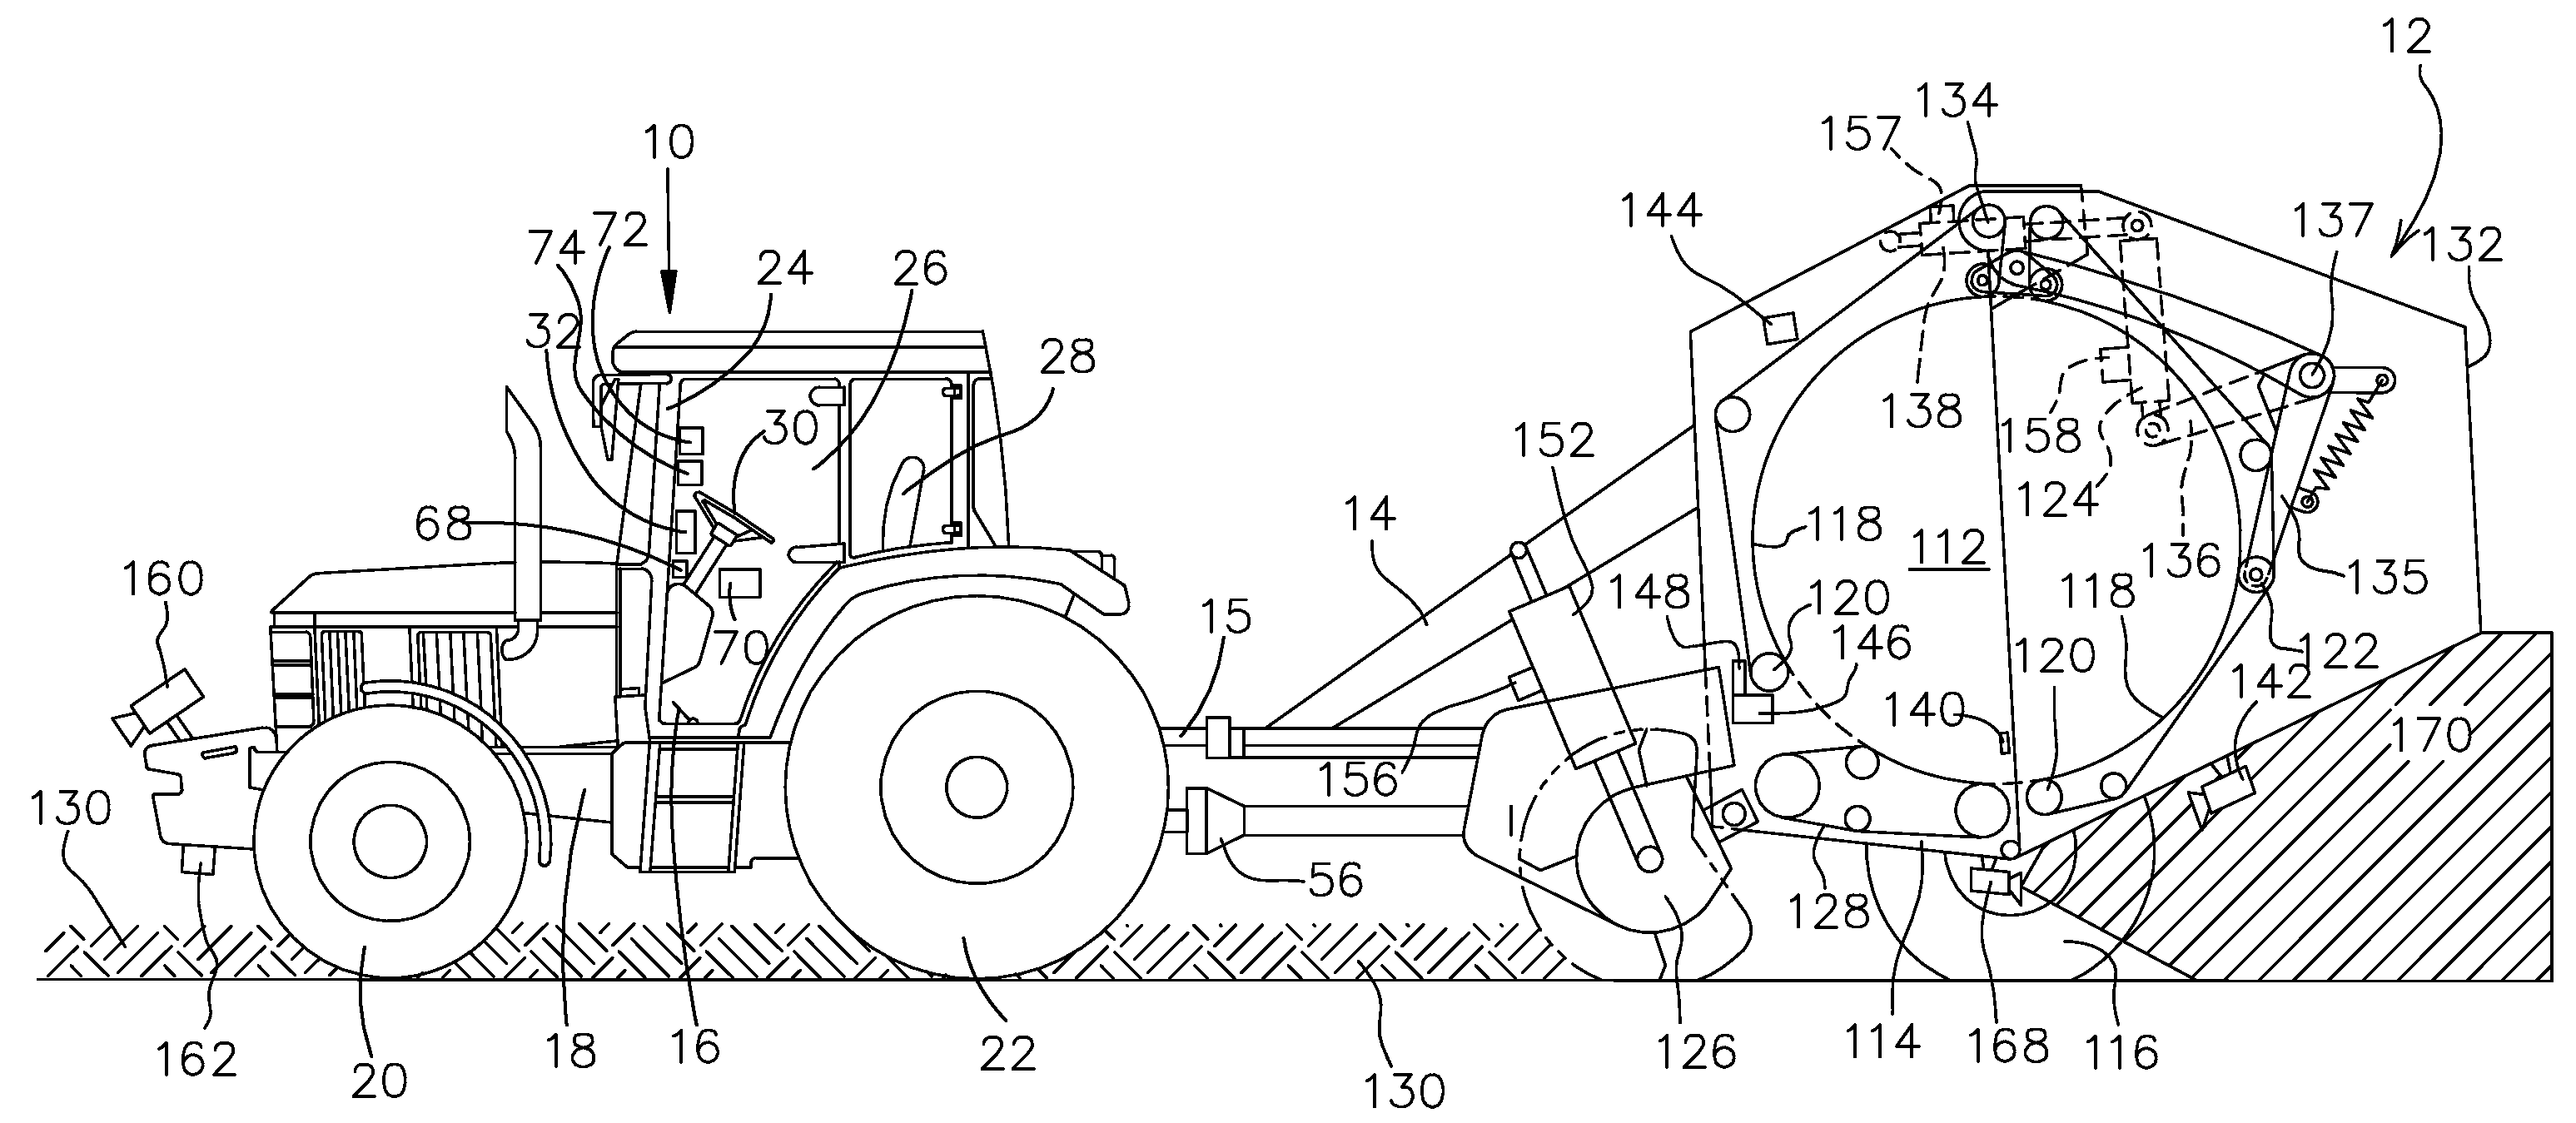 Tractor And Round Baler Combination With Automatic Baling And Automatic Rear Door Opening